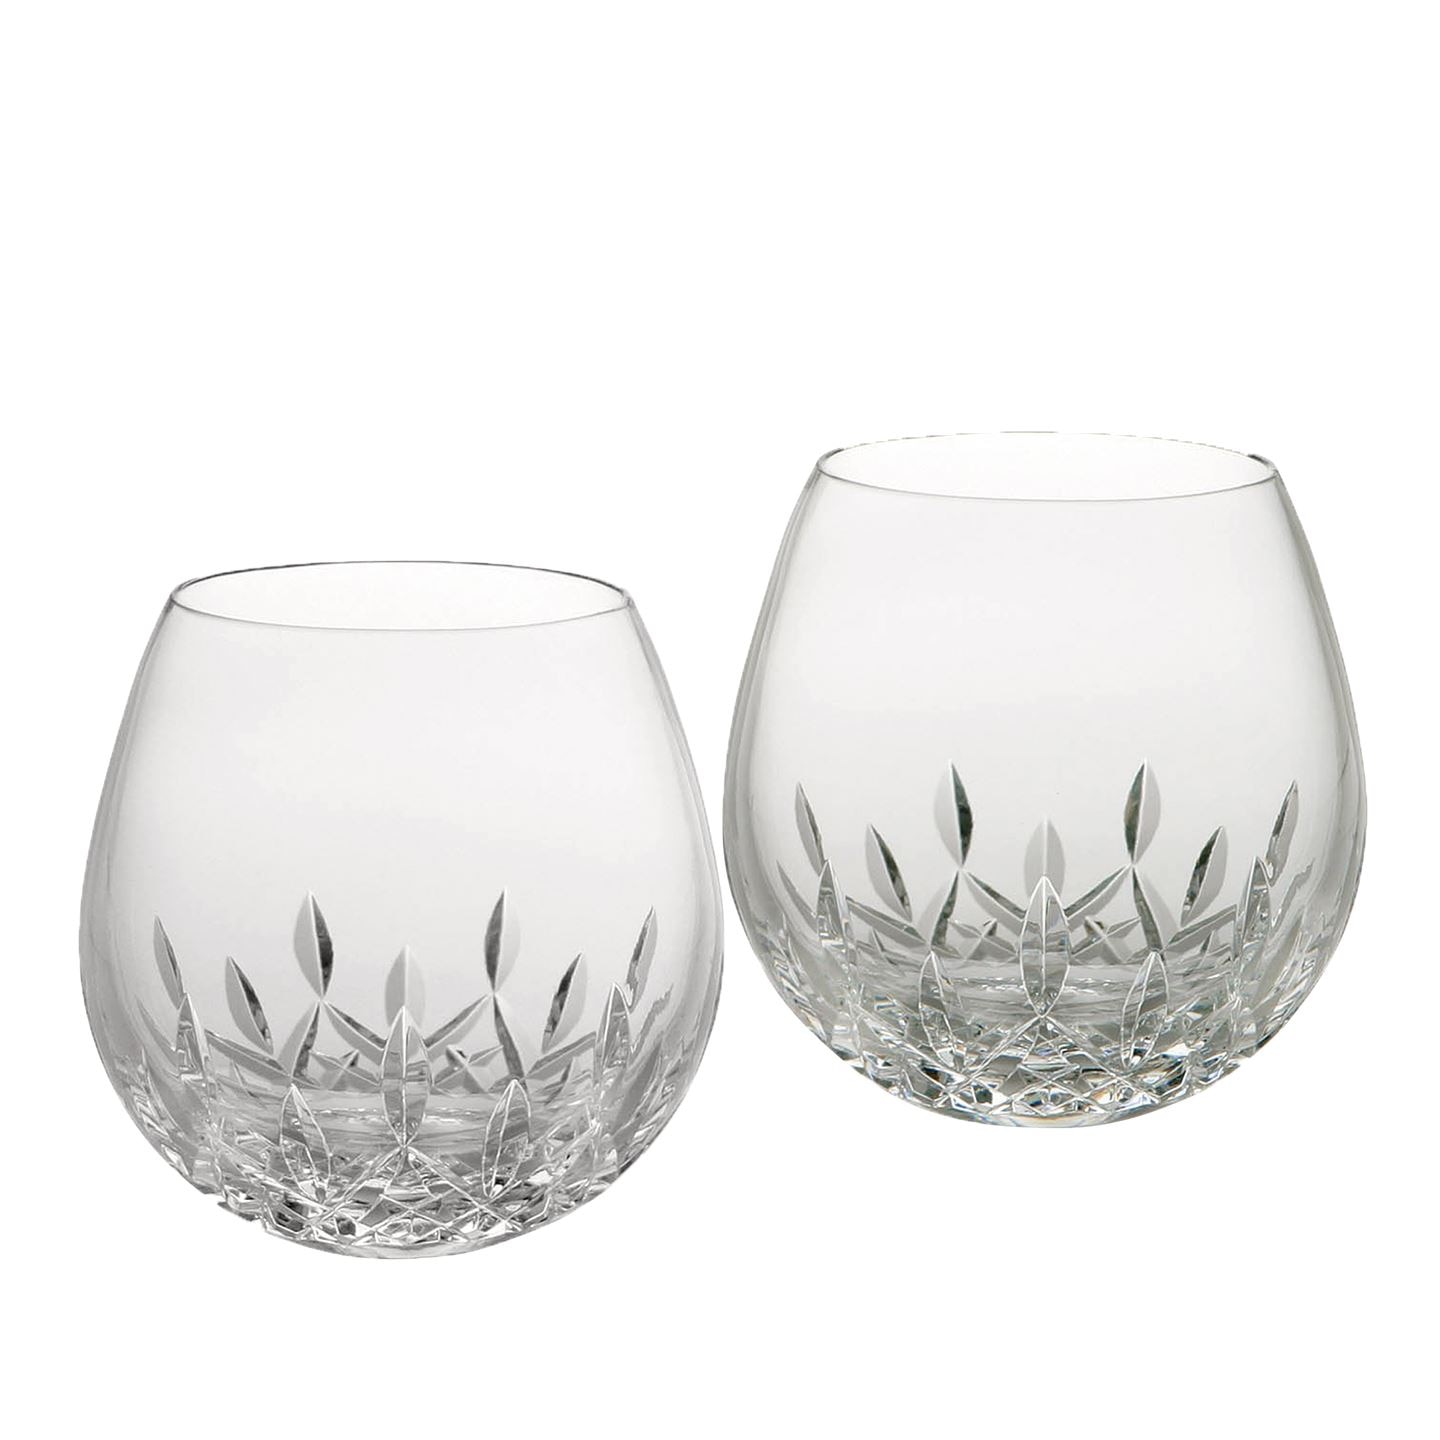 Waterford Lismore Essence Stemless Light Red Wine Glass, Set of 2